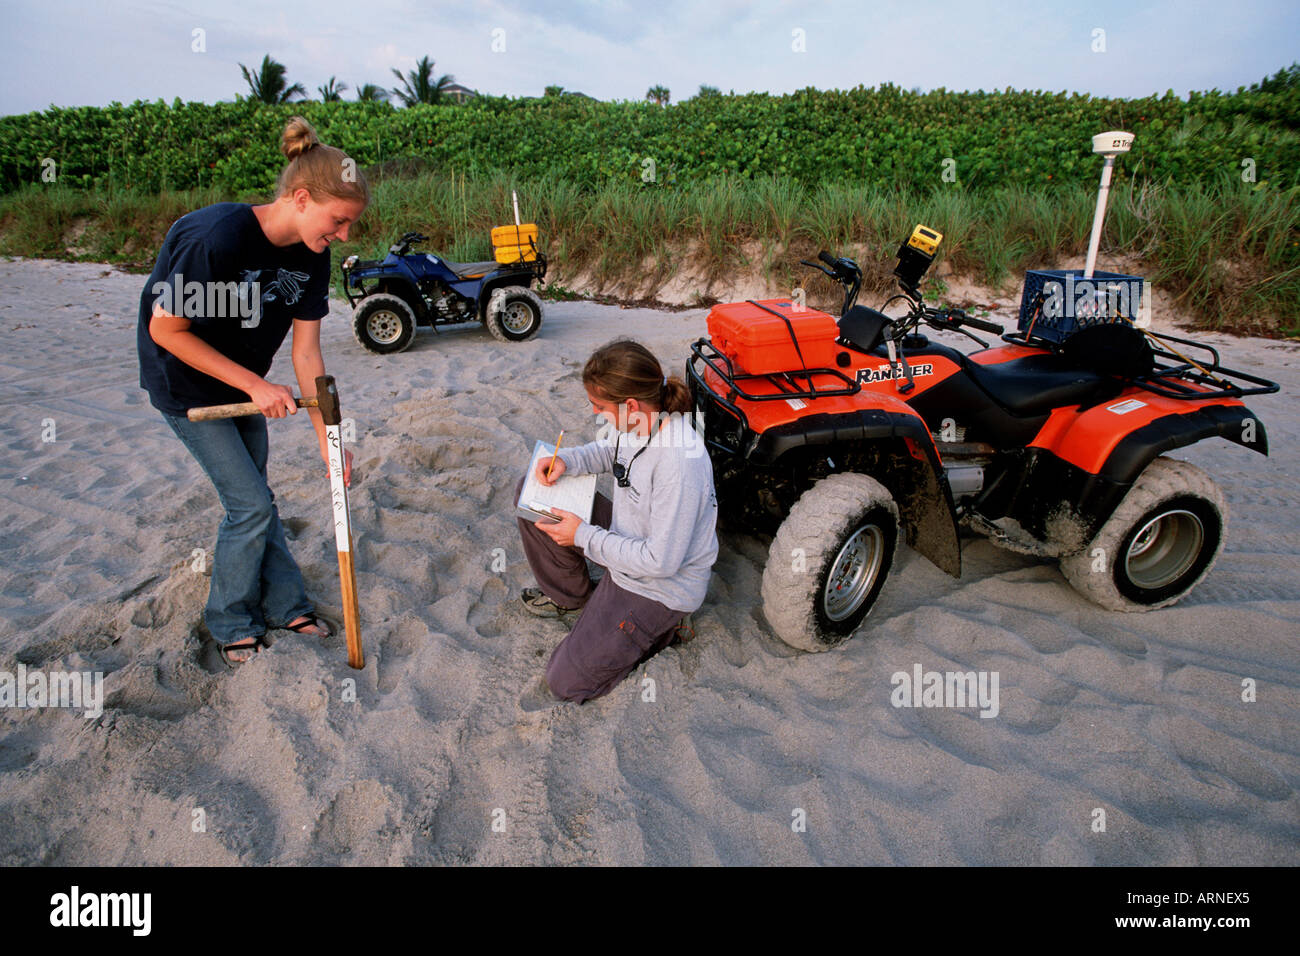 Marine scientists study the Leatherback Turtle Dermochelys coriacea Counting nests and eggs monitors the health of this endangered species Florida Stock Photo